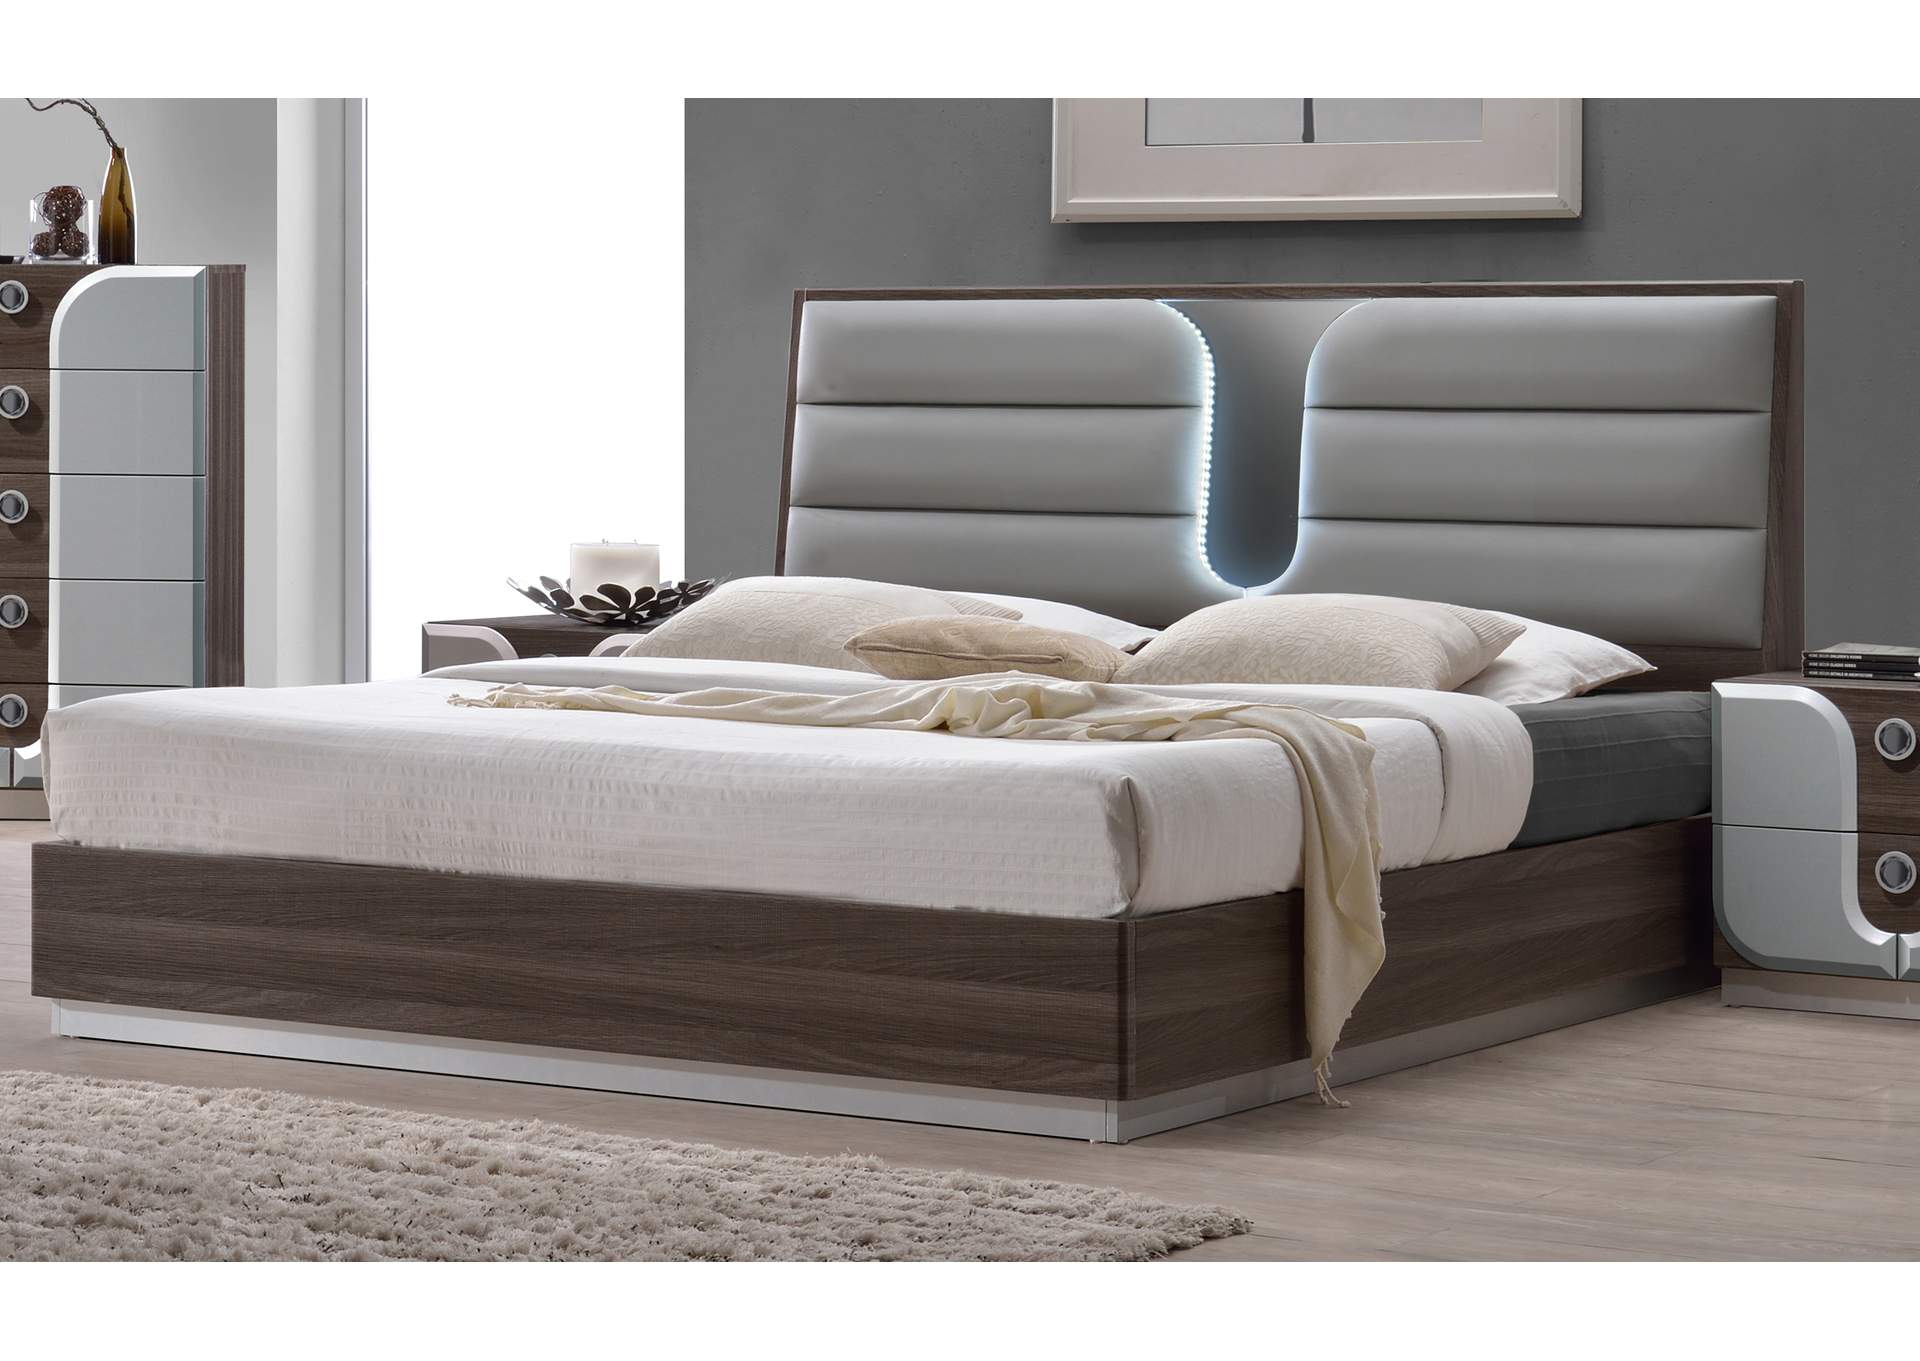 Modern 4-Piece Bedroom Set w/ King Size Bed,Chintaly Imports